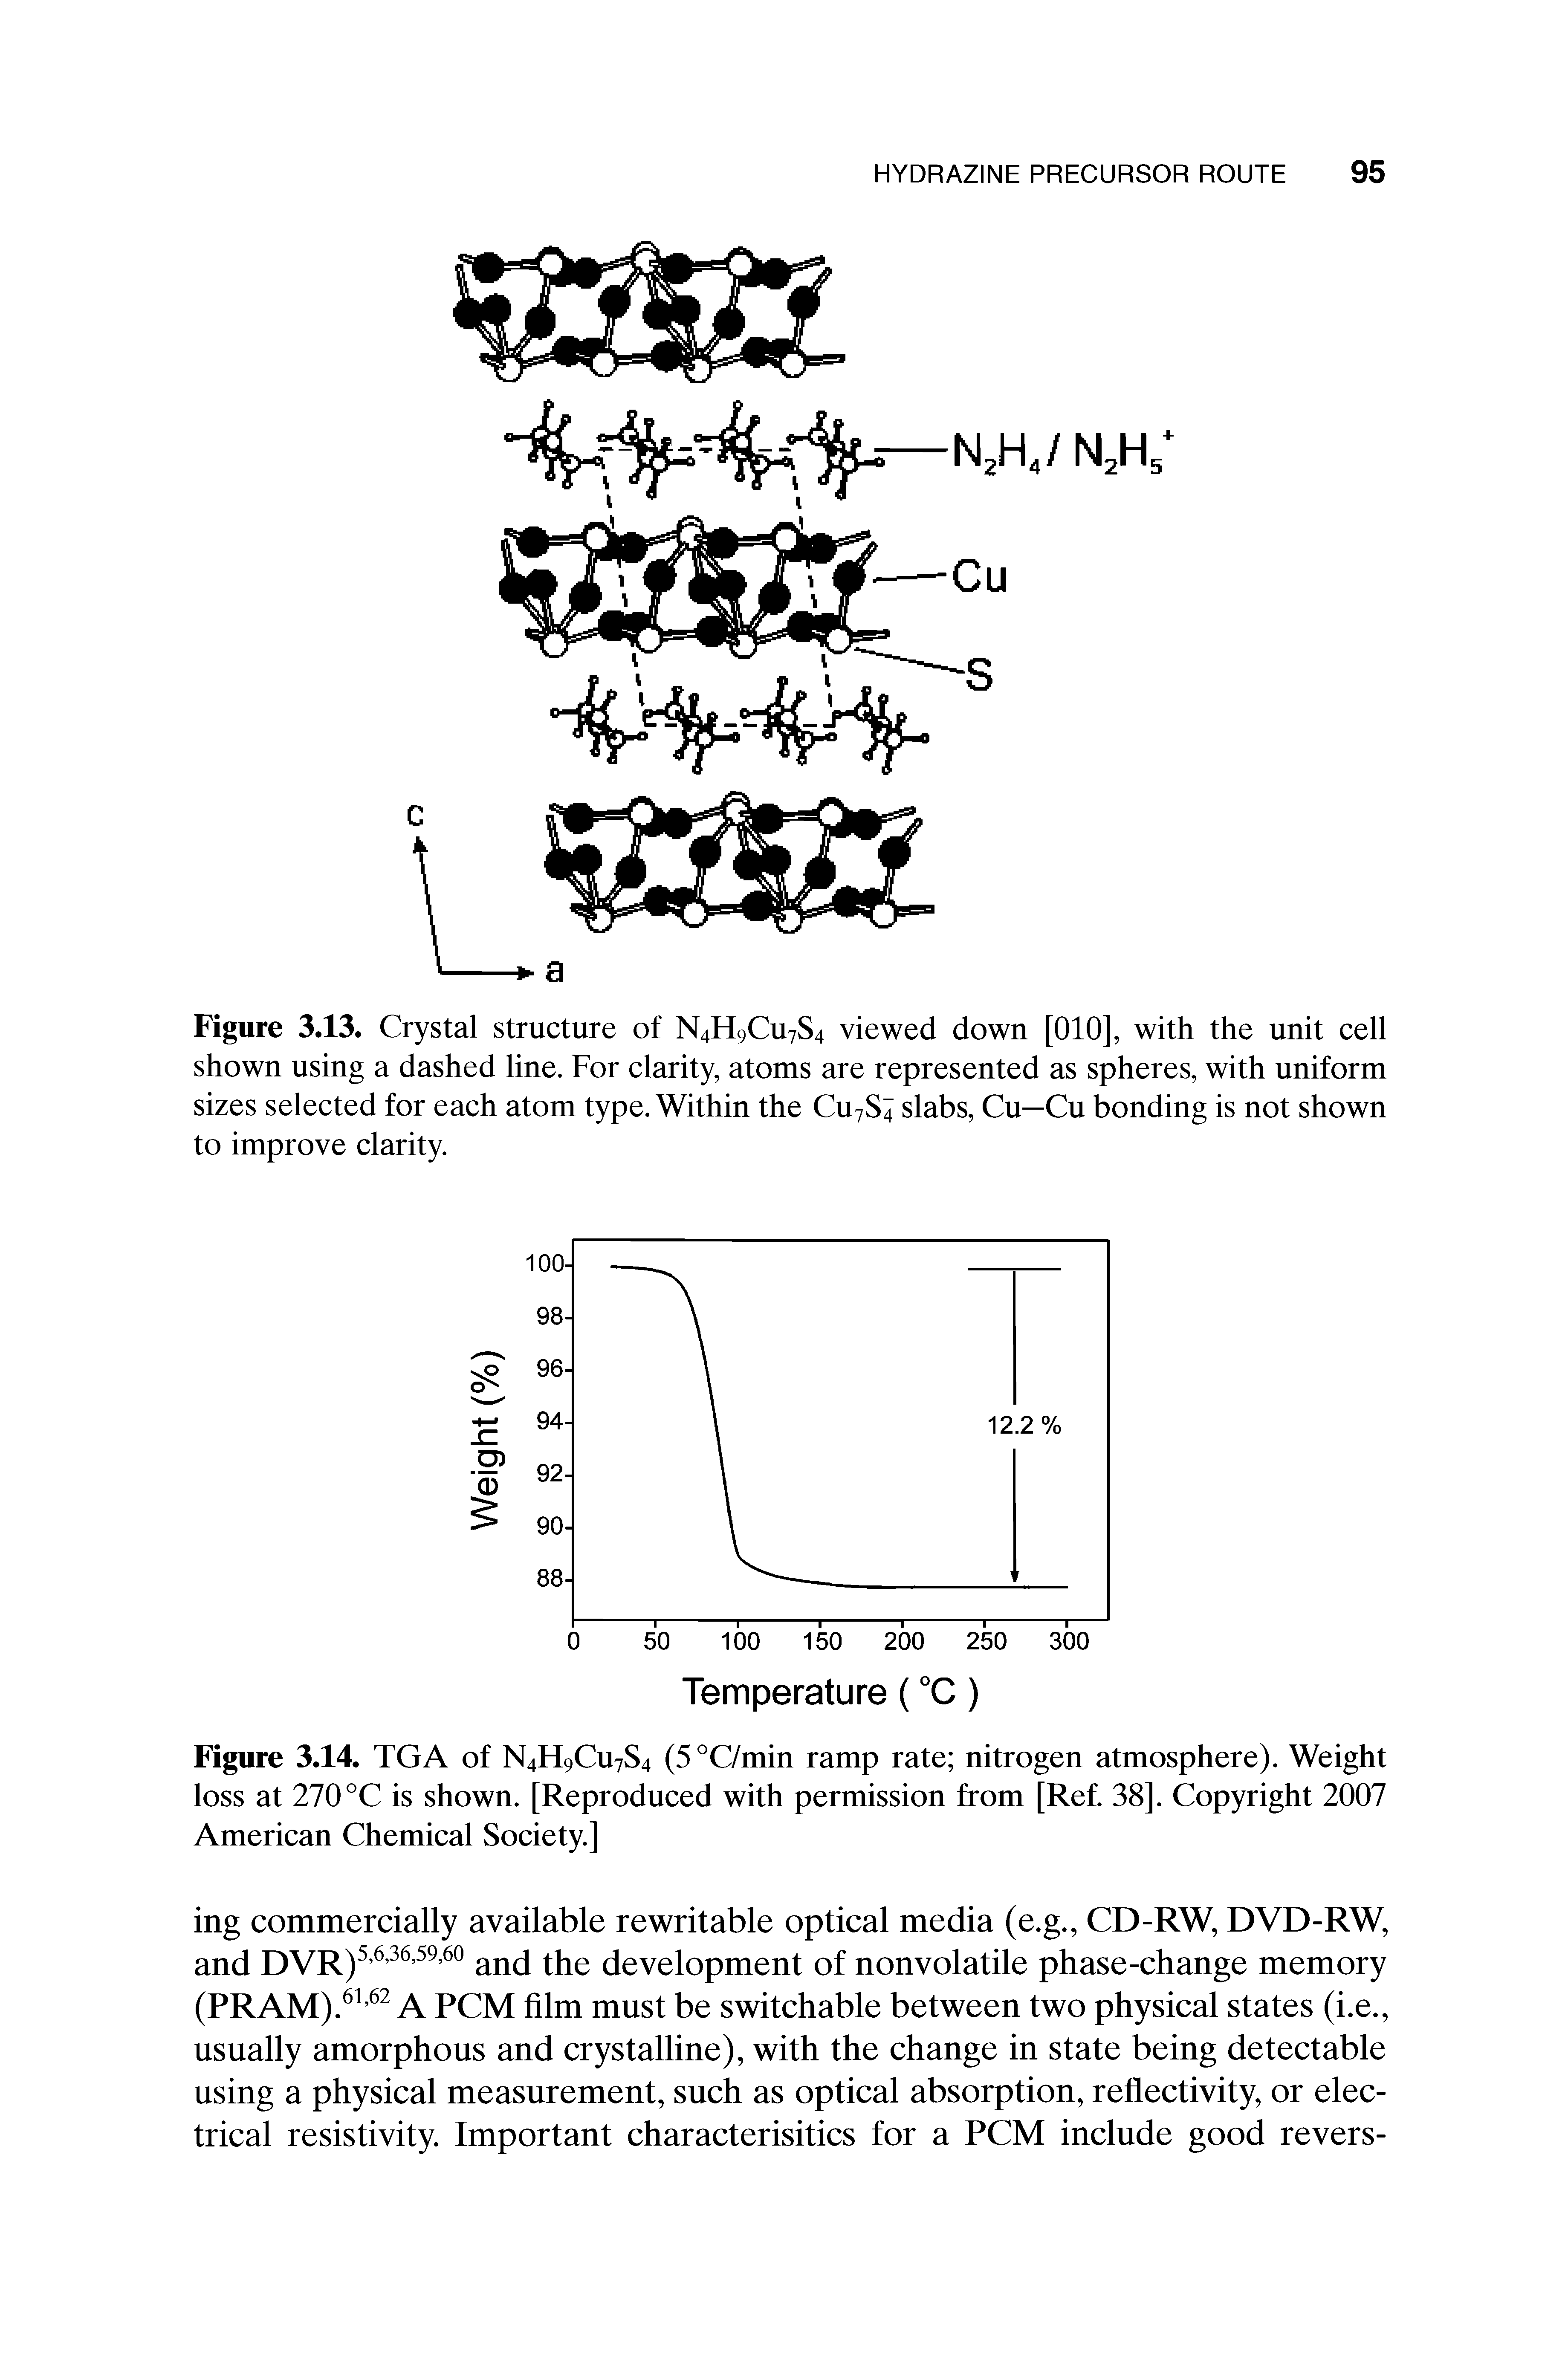 Figure 3.14. TGA of N4FI9CU7S4 (5°C/min ramp rate nitrogen atmosphere). Weight loss at 270 °C is shown. [Reproduced with permission from [Ref. 38]. Copyright 2007 American Chemical Society.]...